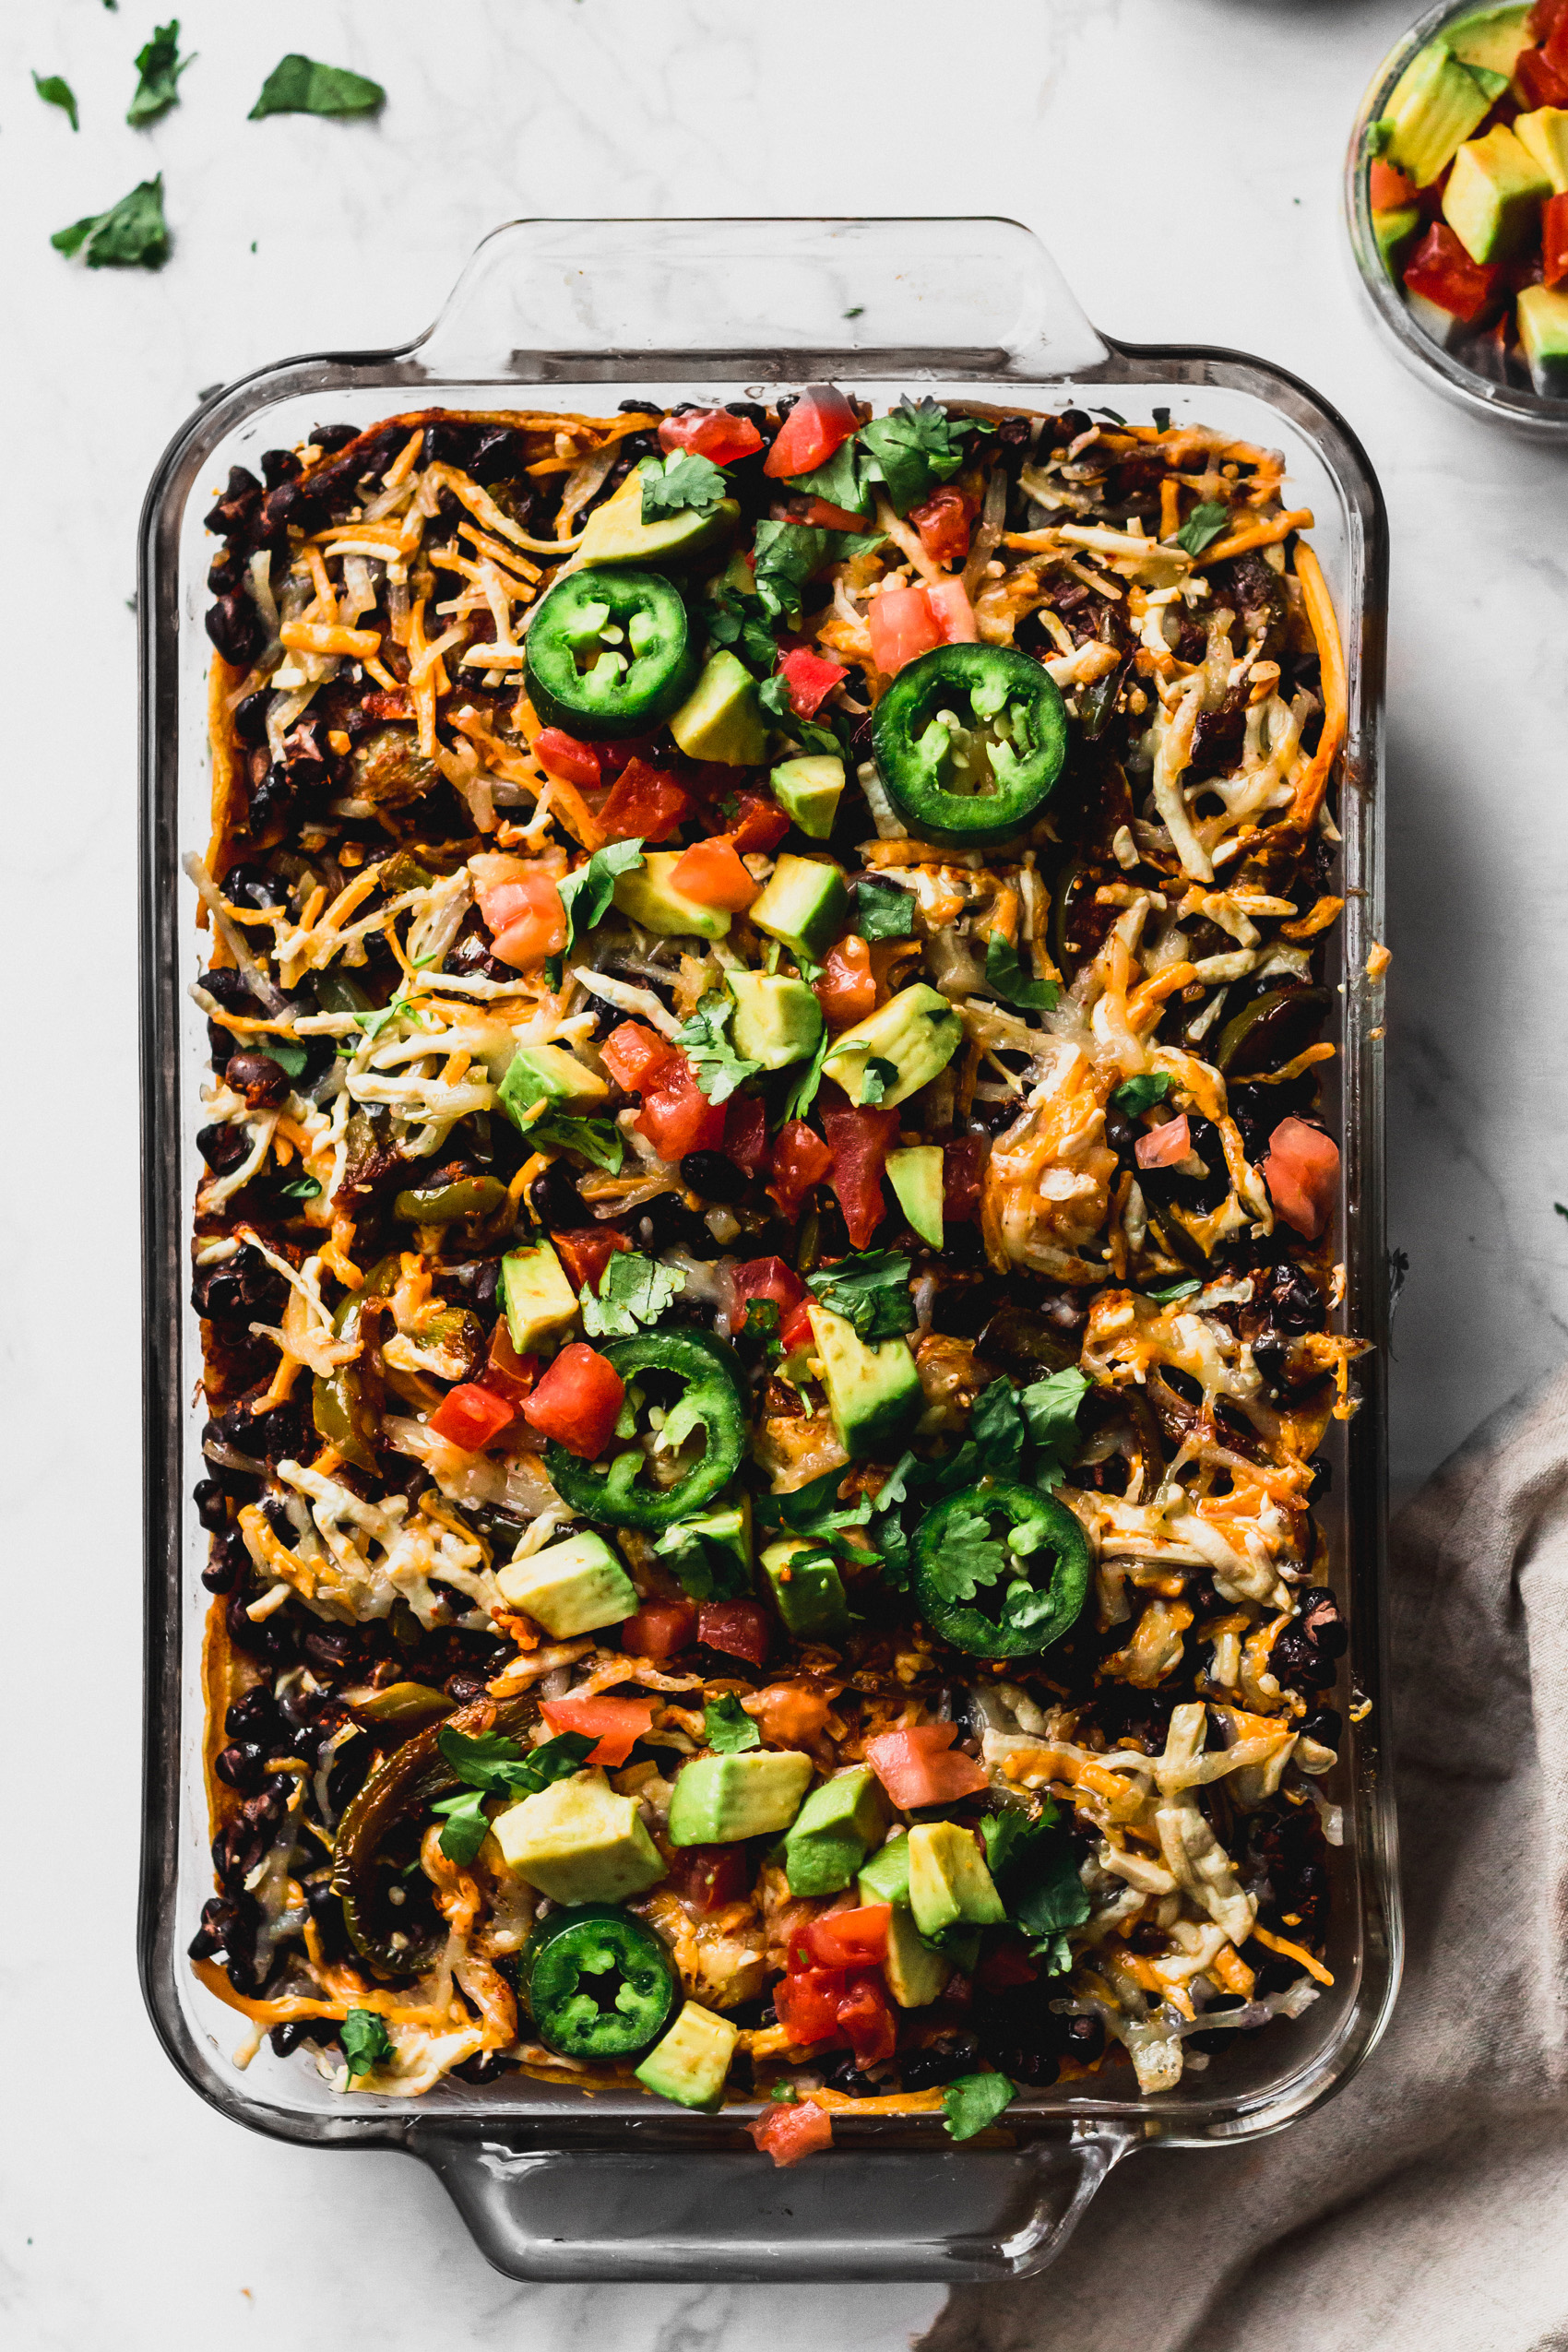 a casserole dish filled with vegan enchiladas topped with tomatoes, avocado, jalapenos and vegan cheese